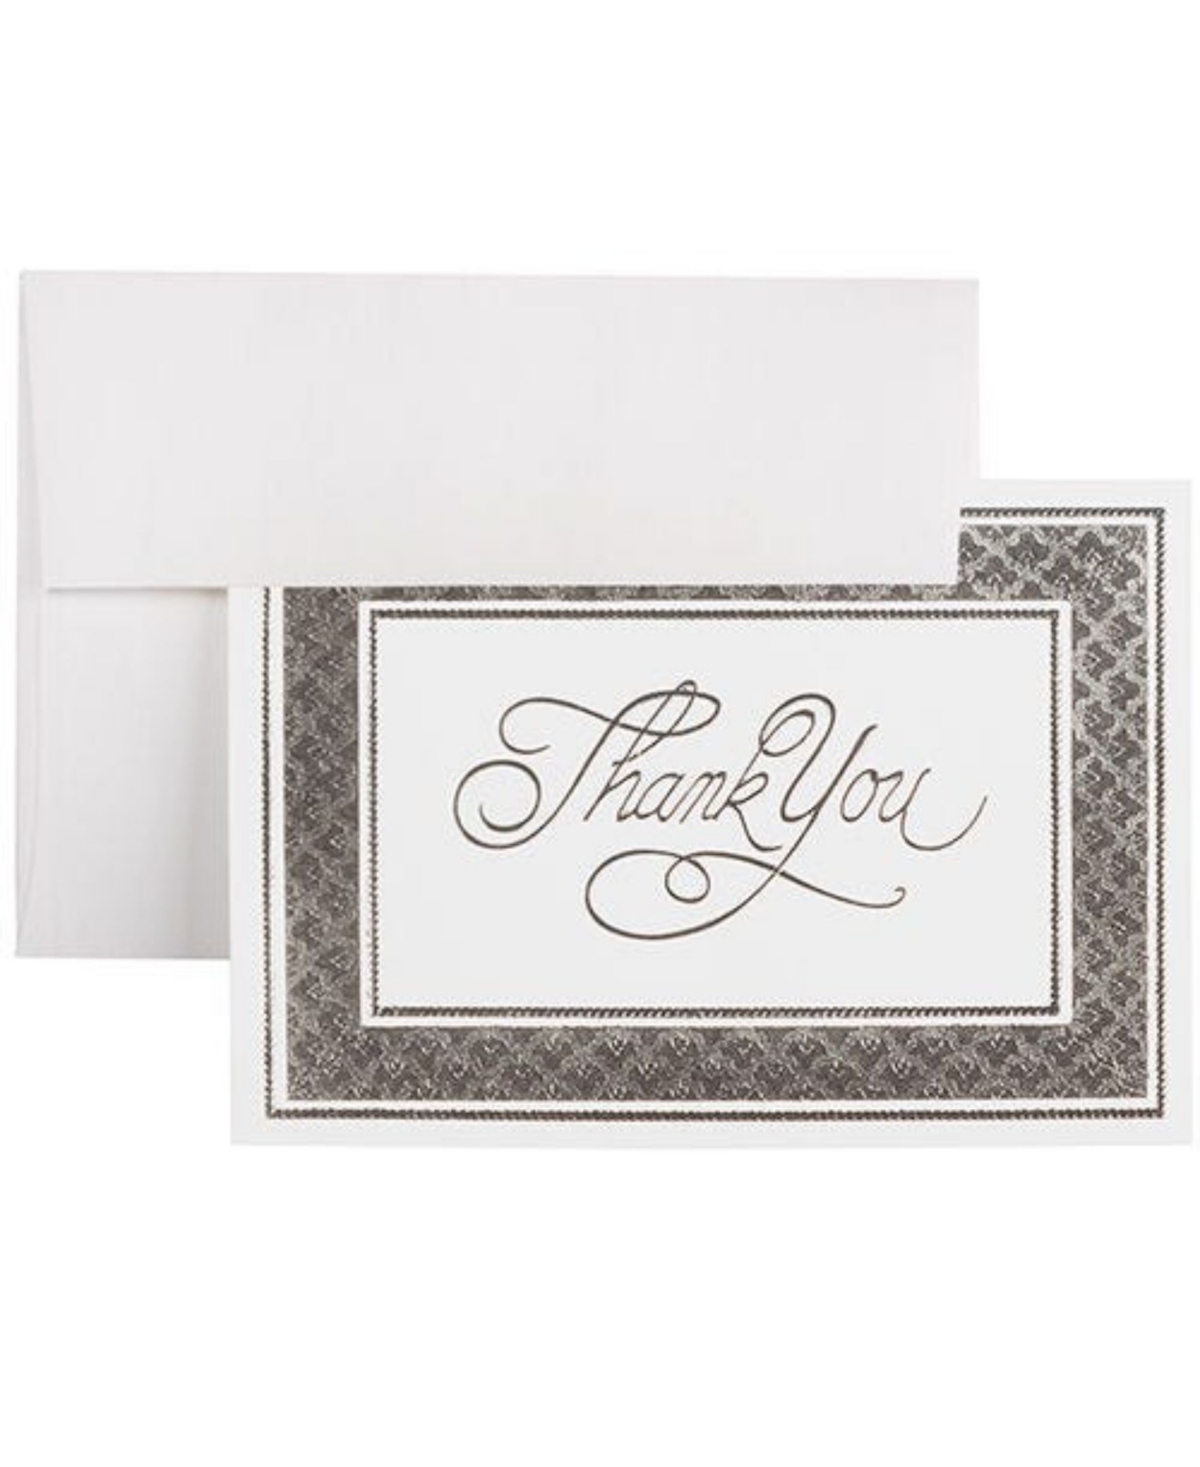 Blank Thank You Cards Set - Cards with - 104 Cards 100 Envelopes - White